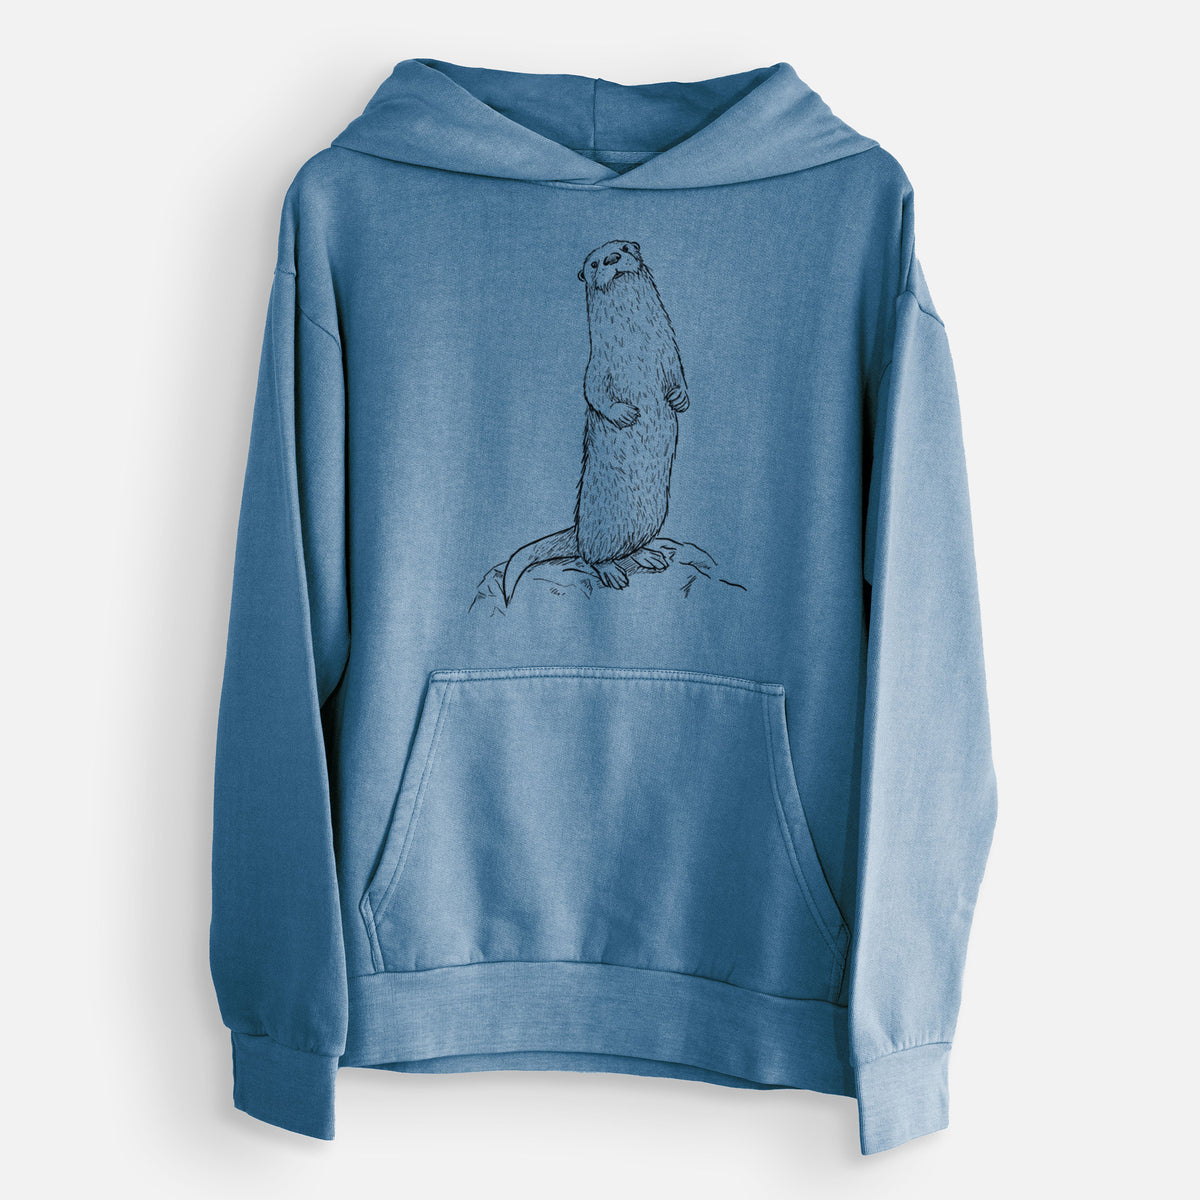 North American River Otter - Lontra canadensis  - Urban Heavyweight Hoodie